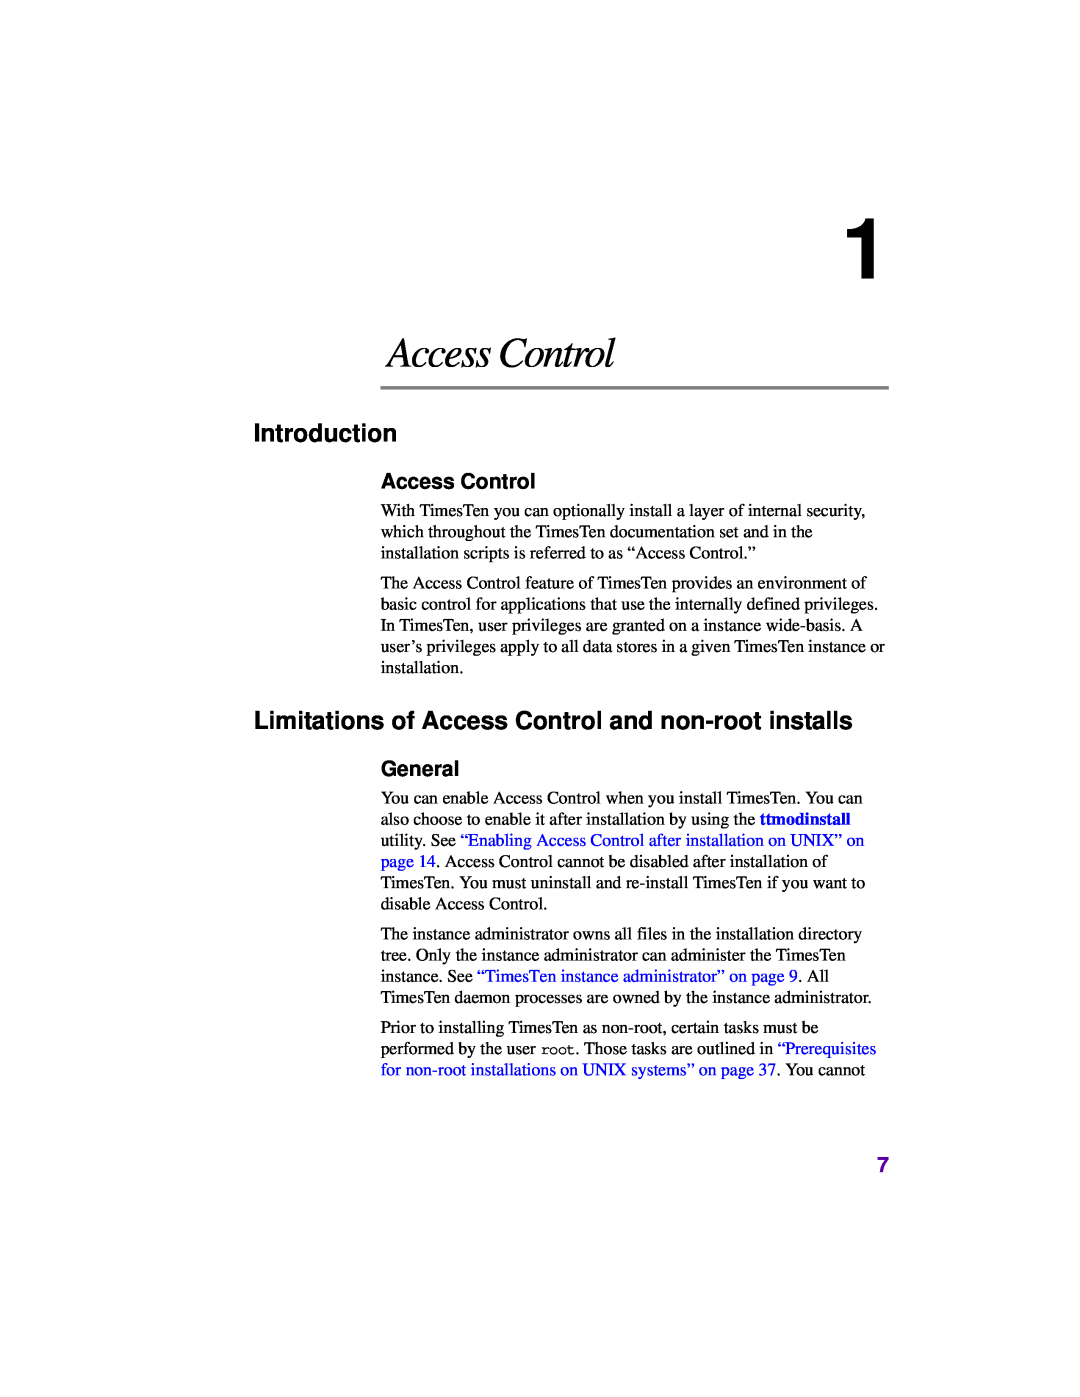 Oracle Audio Technologies B31679-01 manual Introduction, Limitations of Access Control and non-root installs, General 